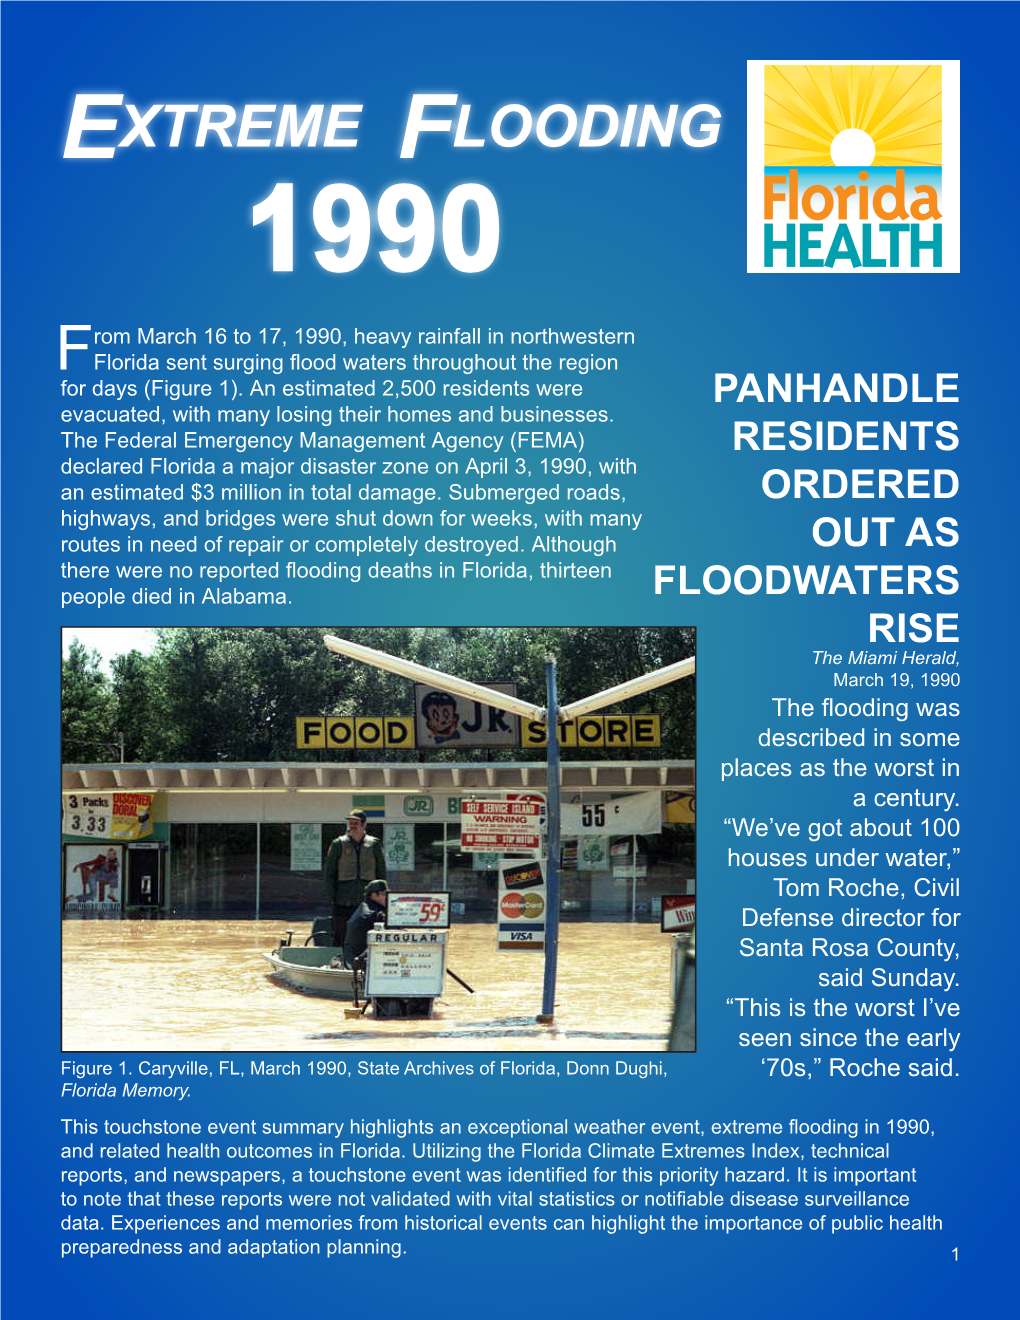 EXTREME FLOODING 1990 Rom March 16 to 17, 1990, Heavy Rainfall in Northwestern Fflorida Sent Surging Flood Waters Throughout the Region for Days (Figure 1)